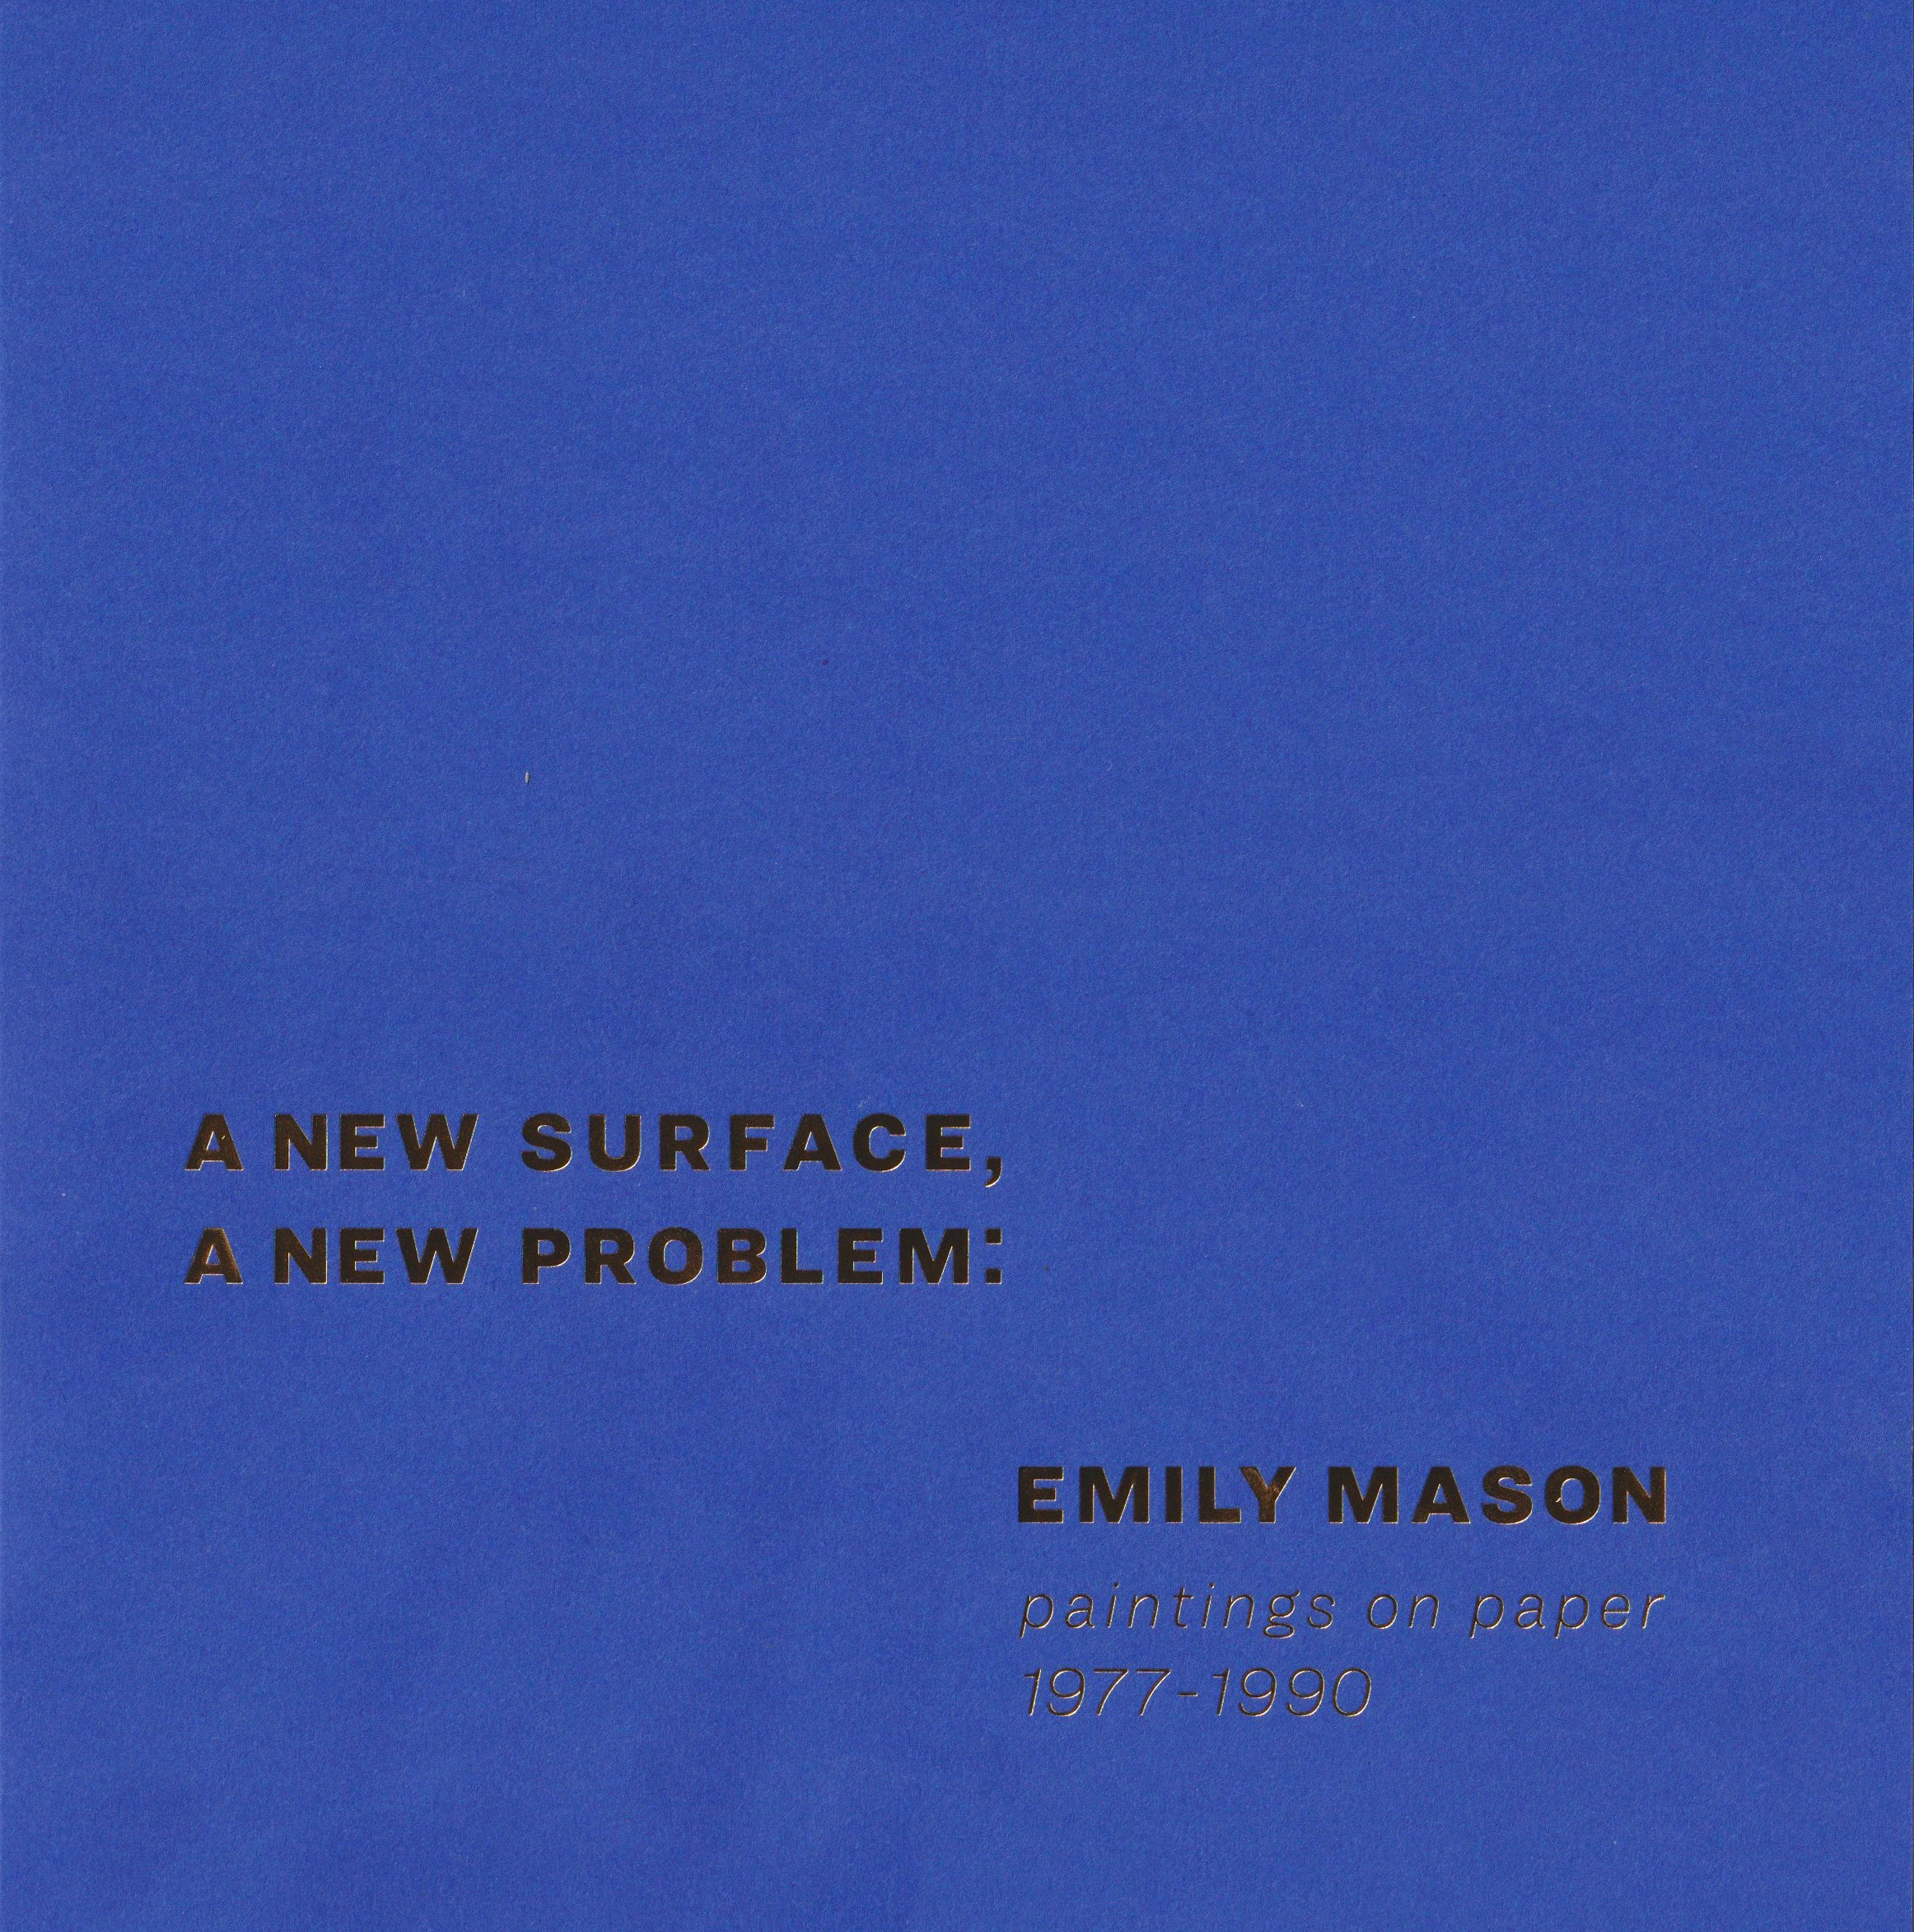 Blue book cover with silver text that reads, "A New Surface, A New Problem: Emily Mason, Paintings on Paper 1970-1990."